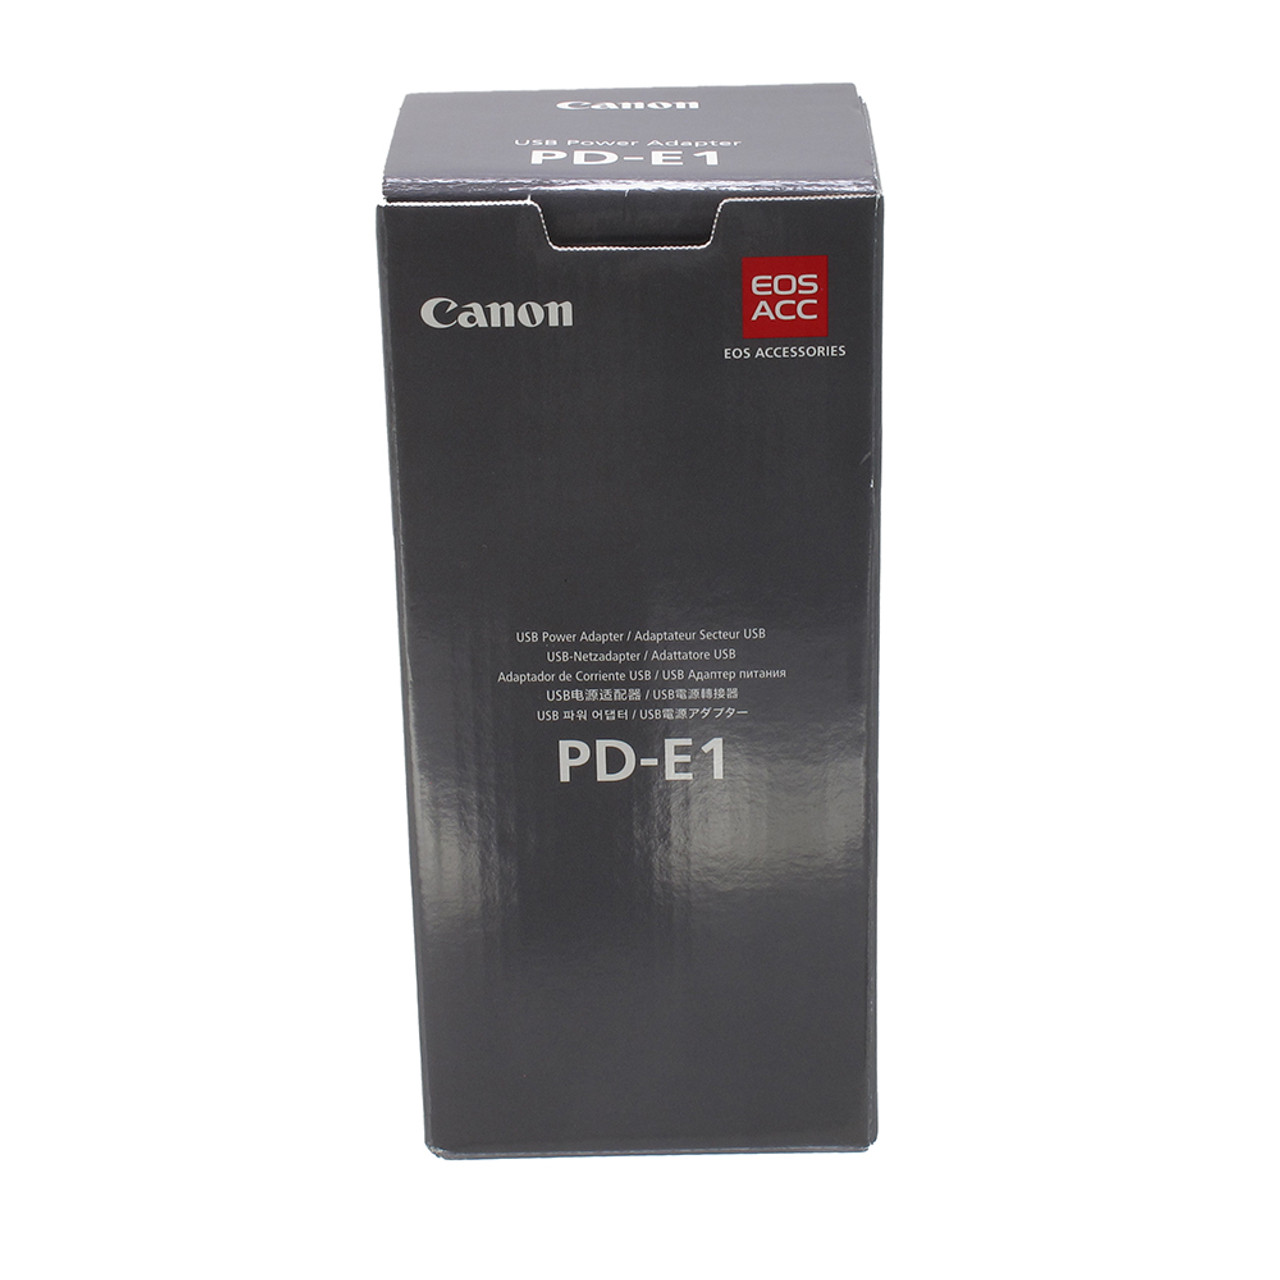 USED CANON PD-1 USB ADAPTER